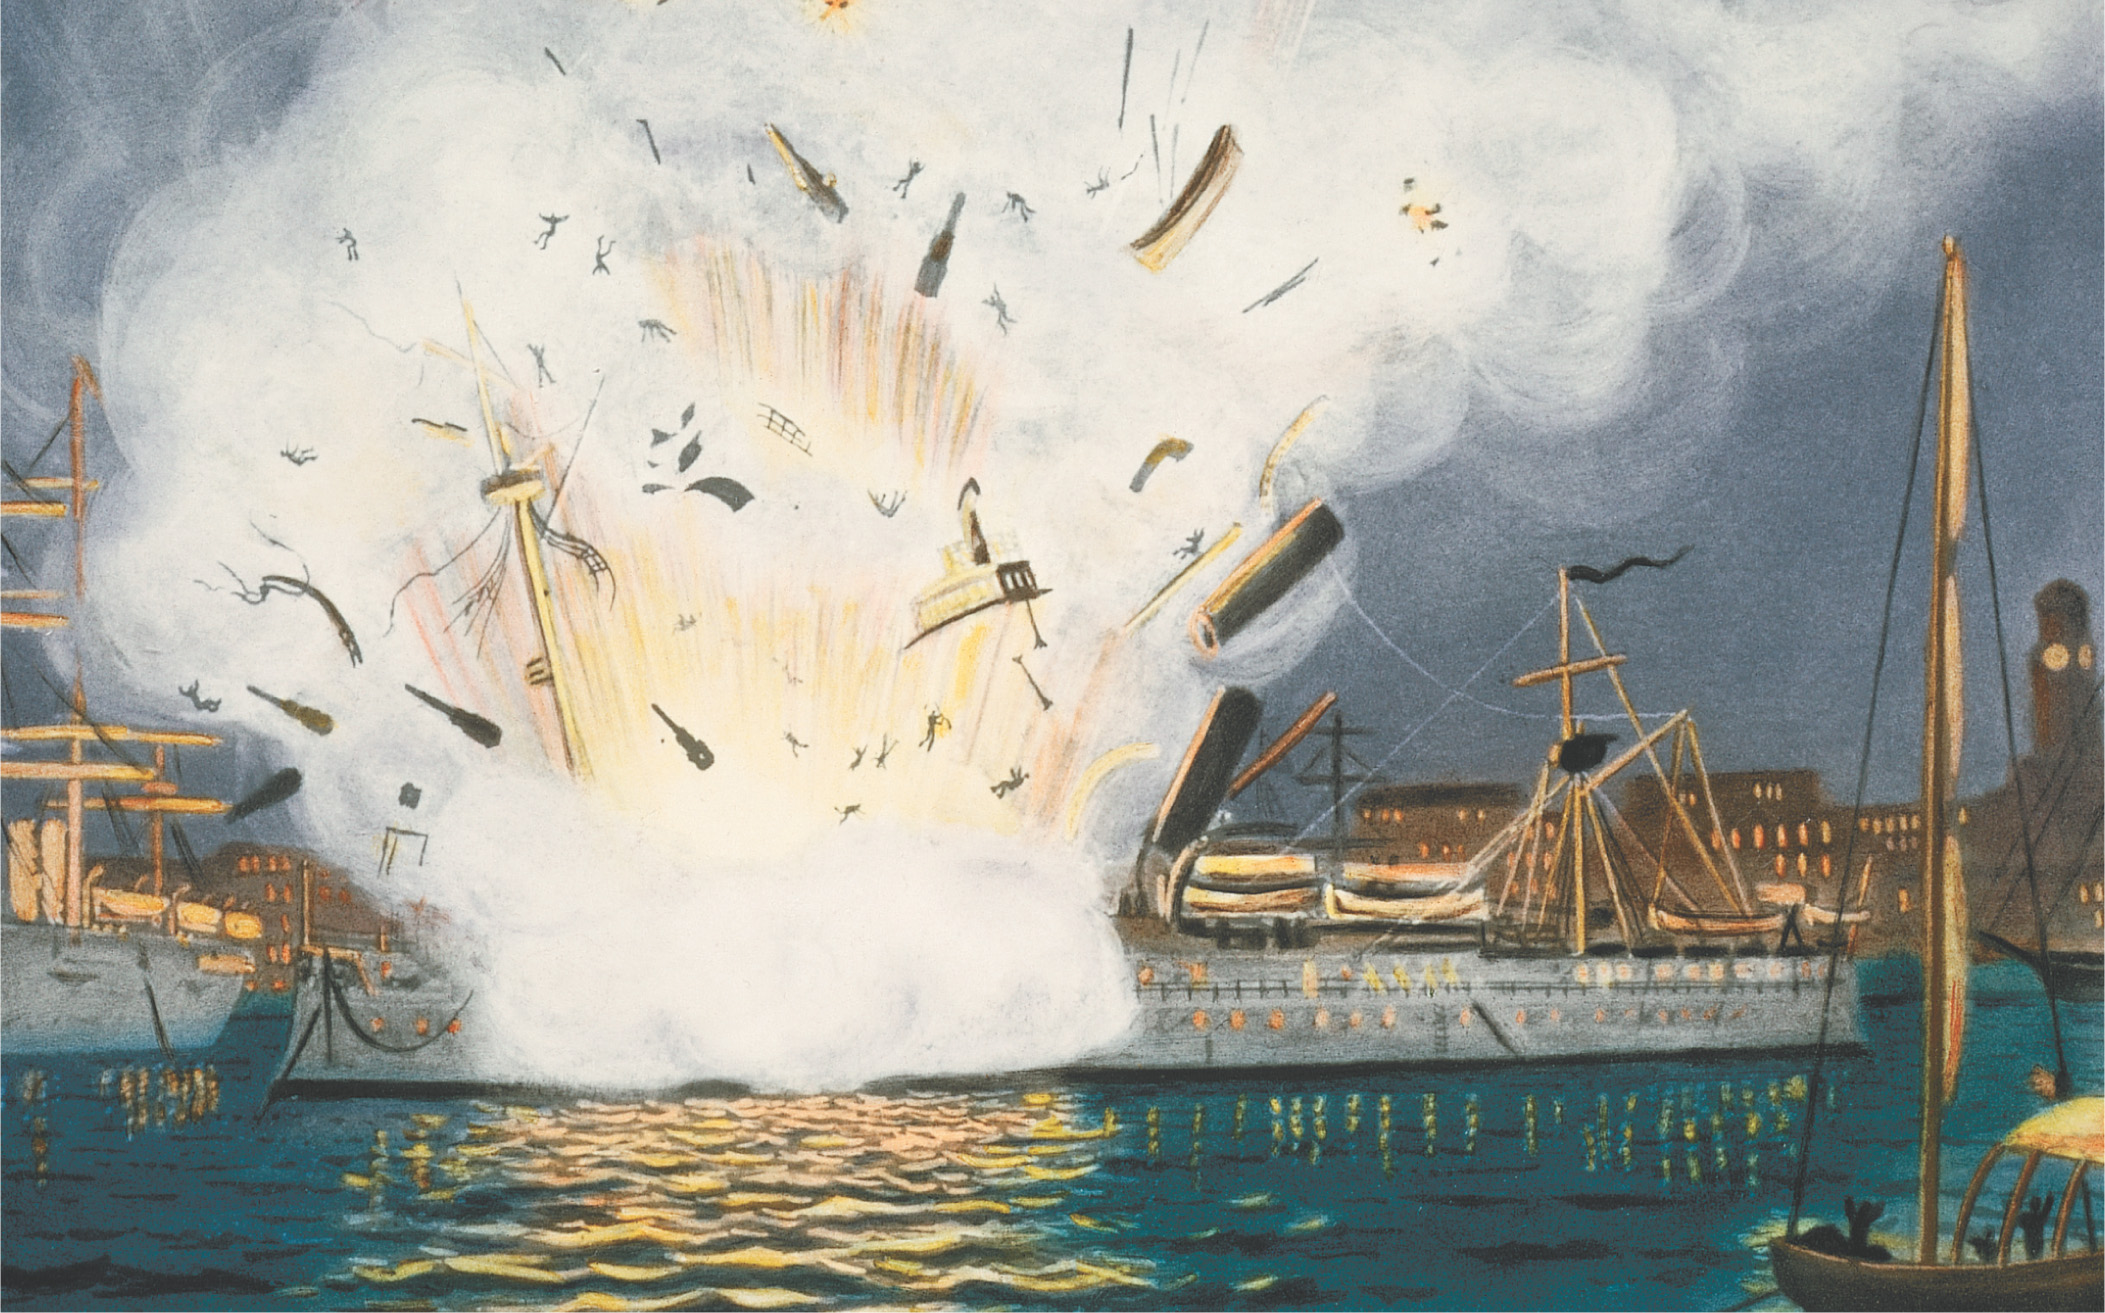 Painting: a ship explodes